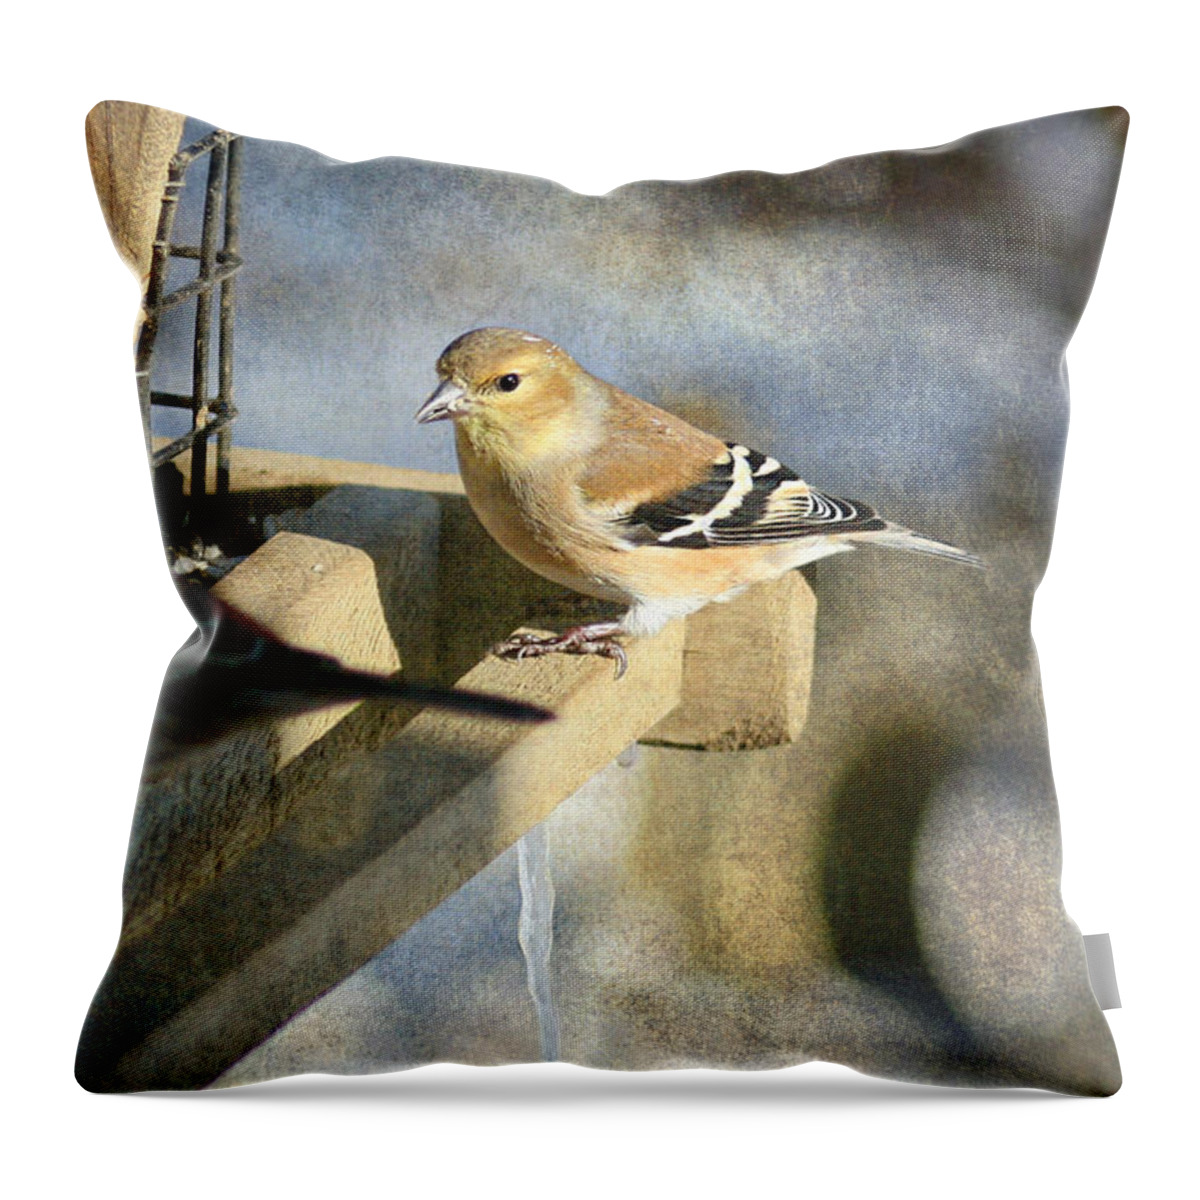 American Goldfinch Throw Pillow featuring the photograph American Goldfinch by Susan McMenamin